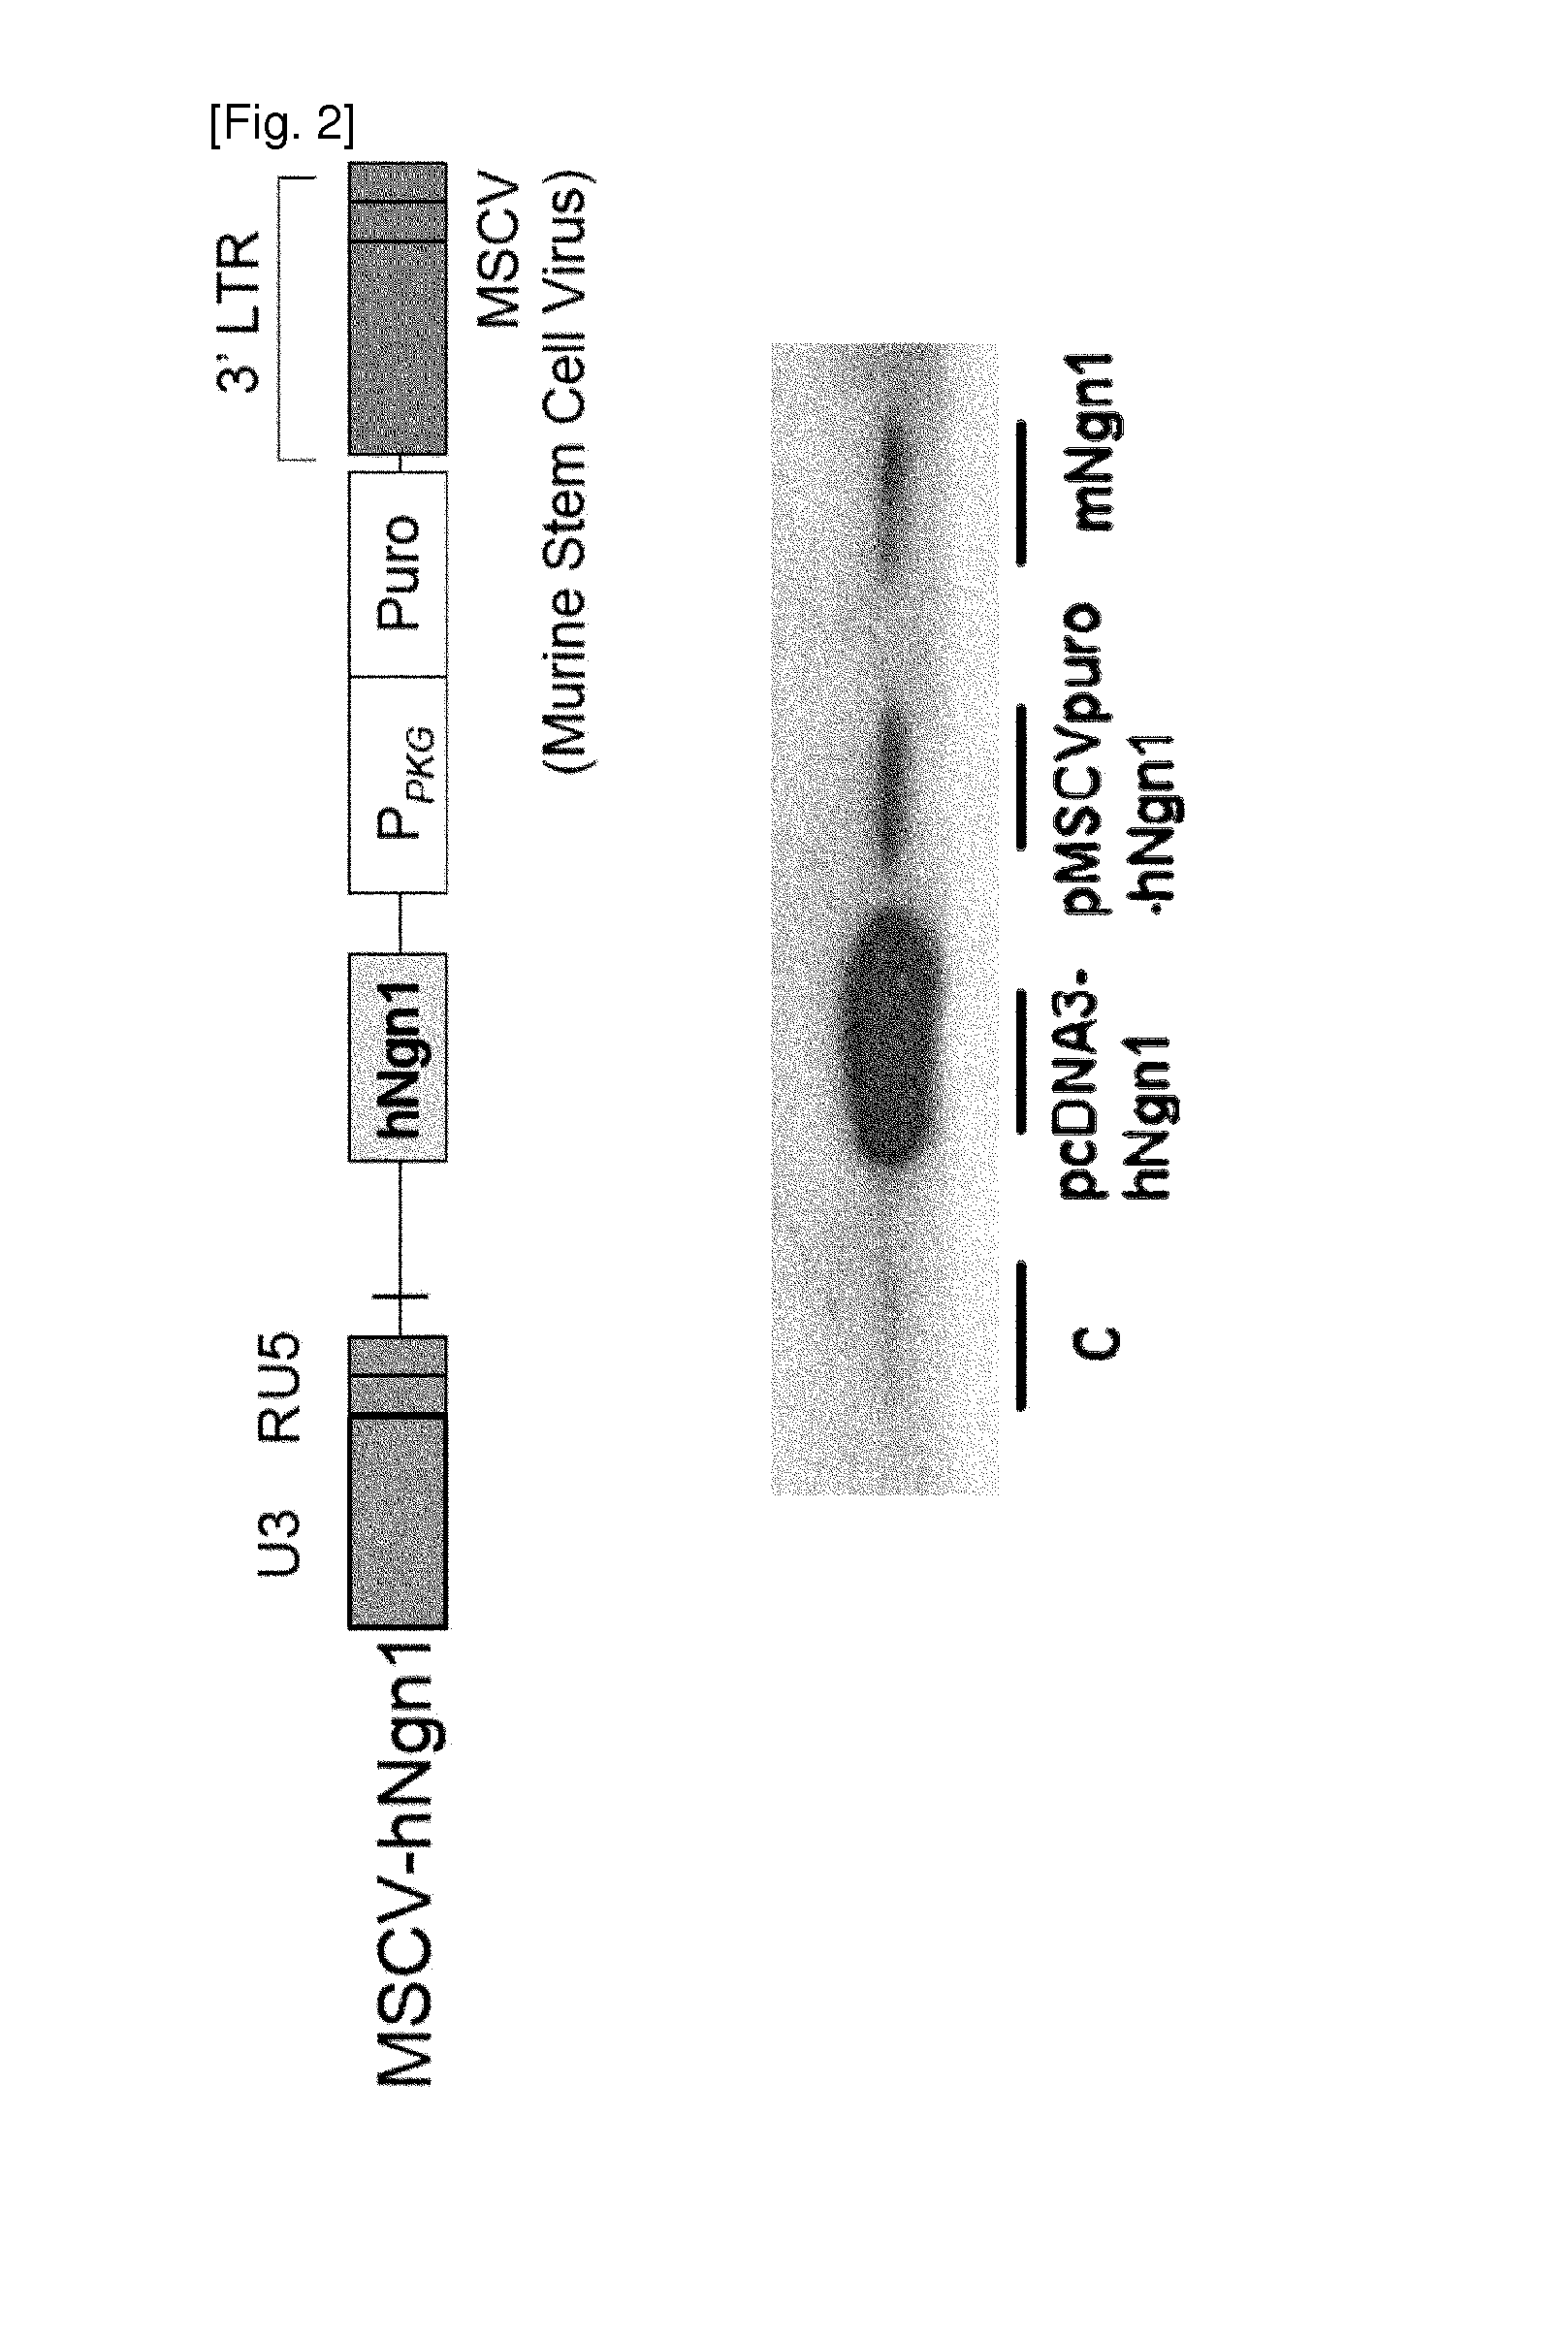 Adult stem cell line introduced with hepatocyte growth factor gene and neurogenic transcription factor gene with basic helix-loop-helix motif and uses thereof